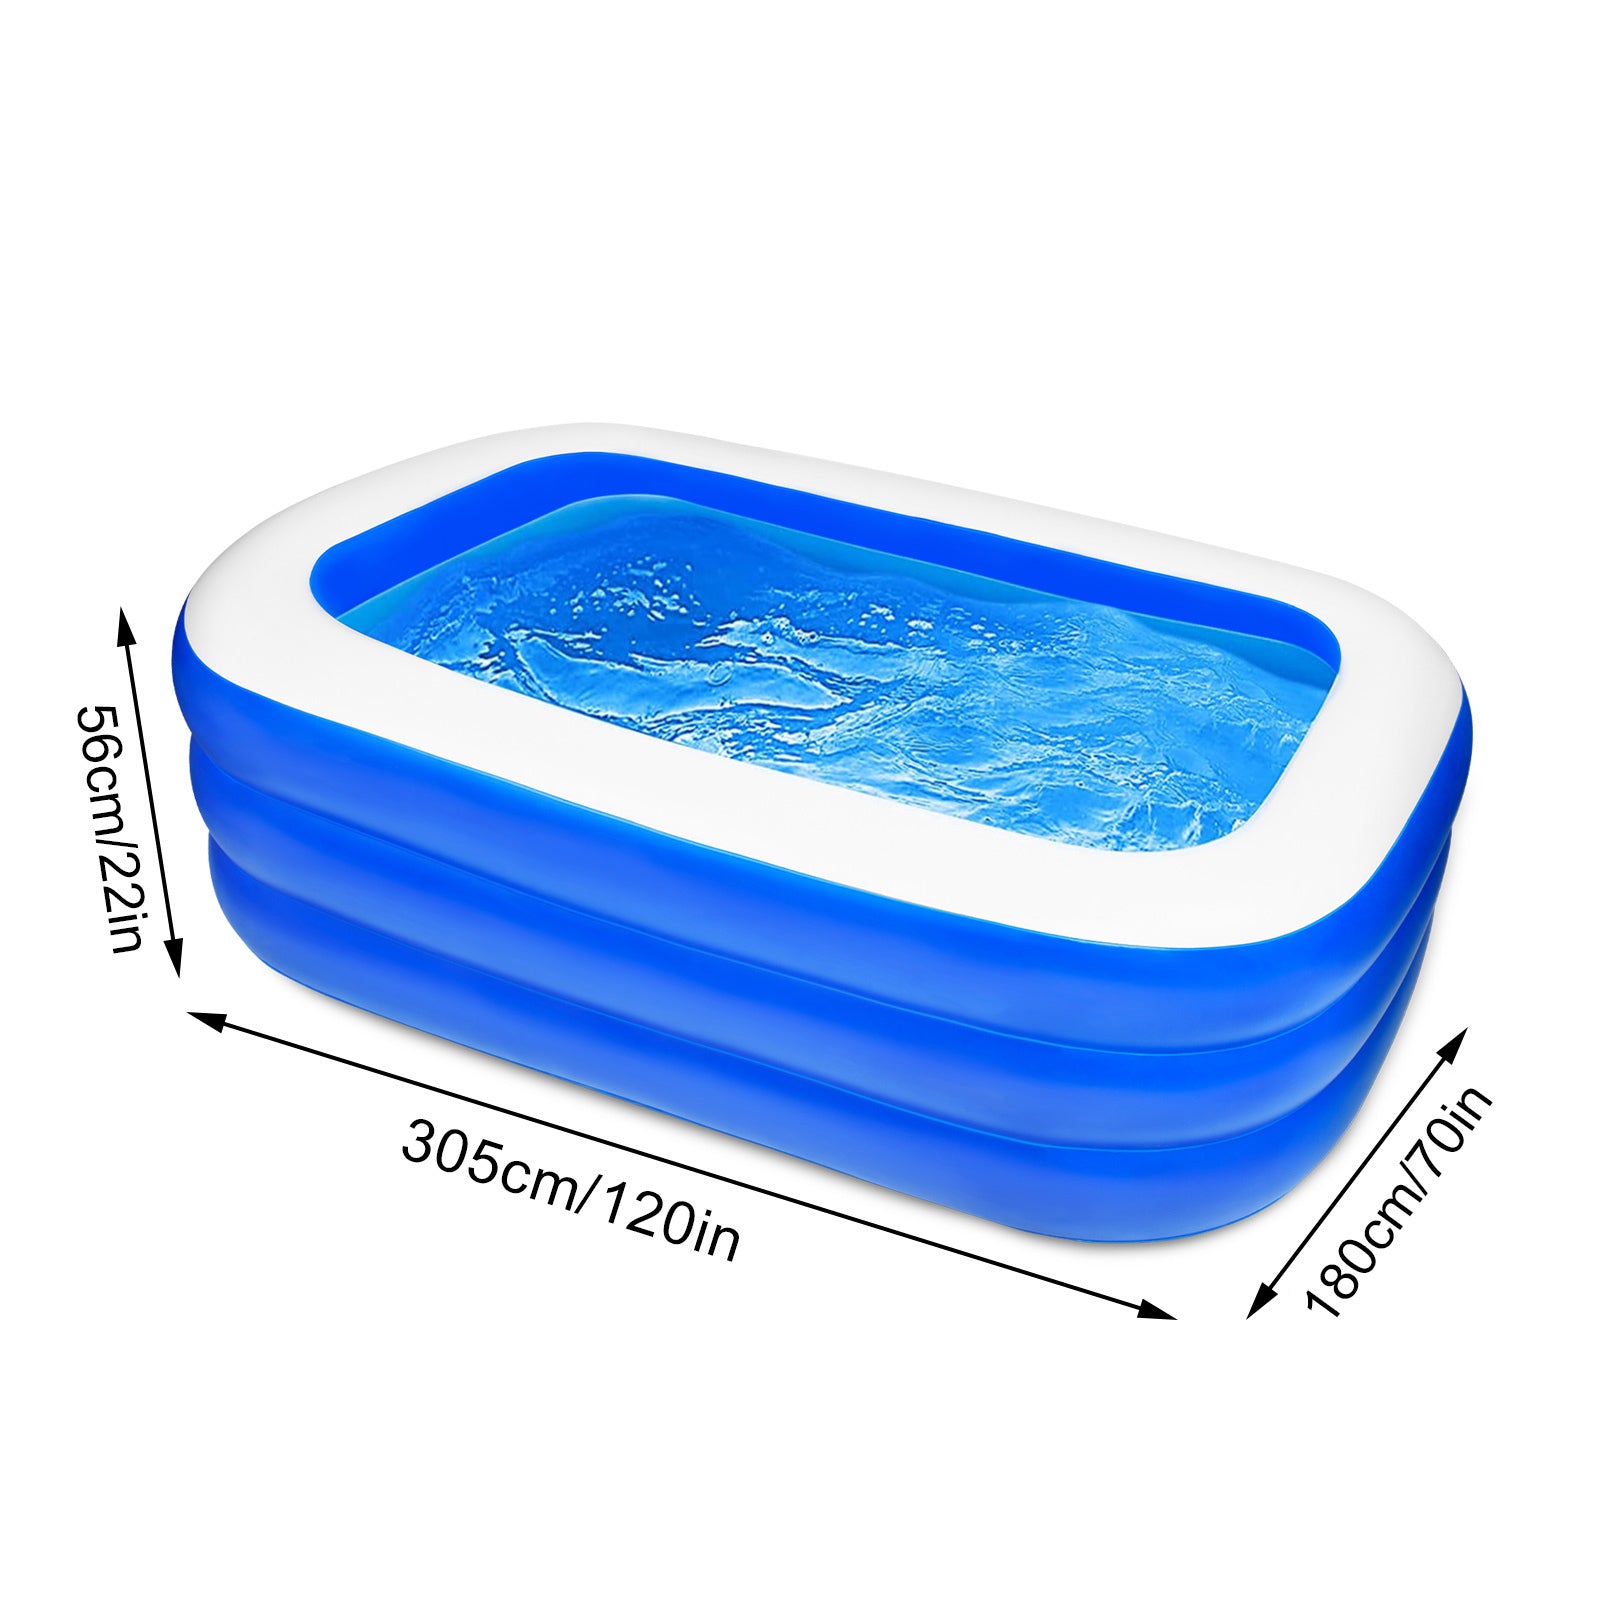 Inflatable Swimming Pool Three-layer Printing, Blue